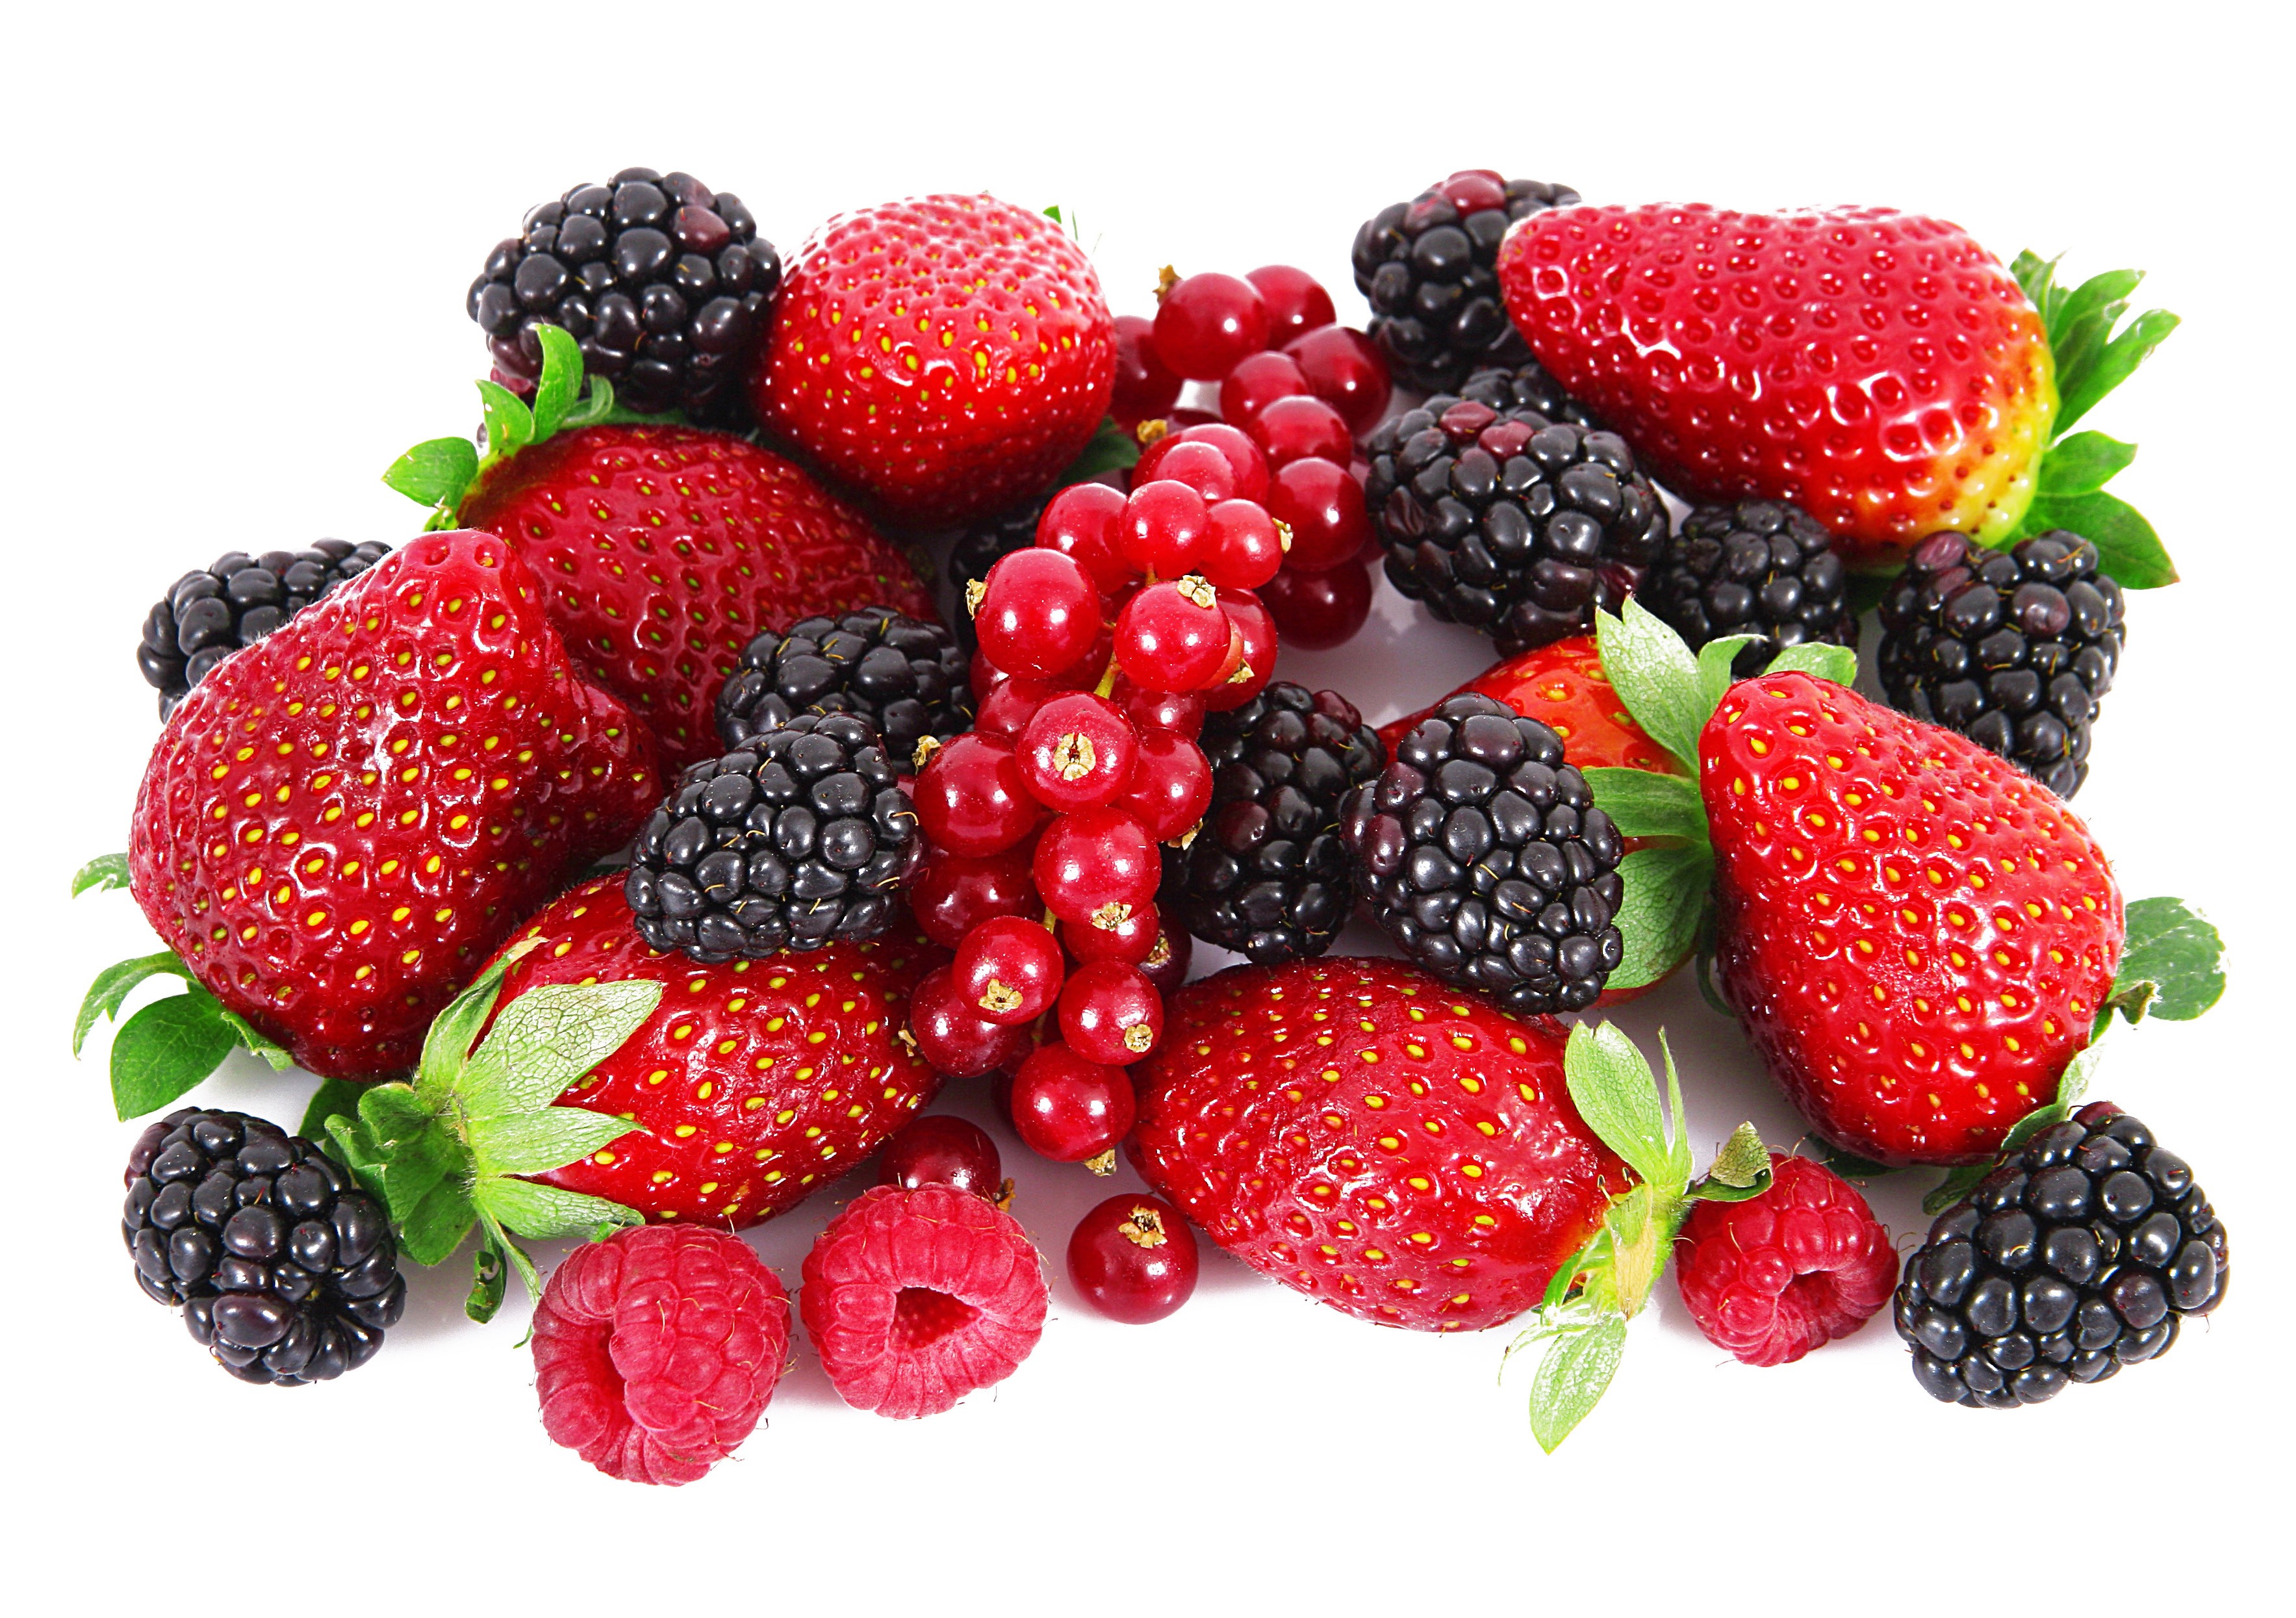 Colourful-berries-for-health-benefits